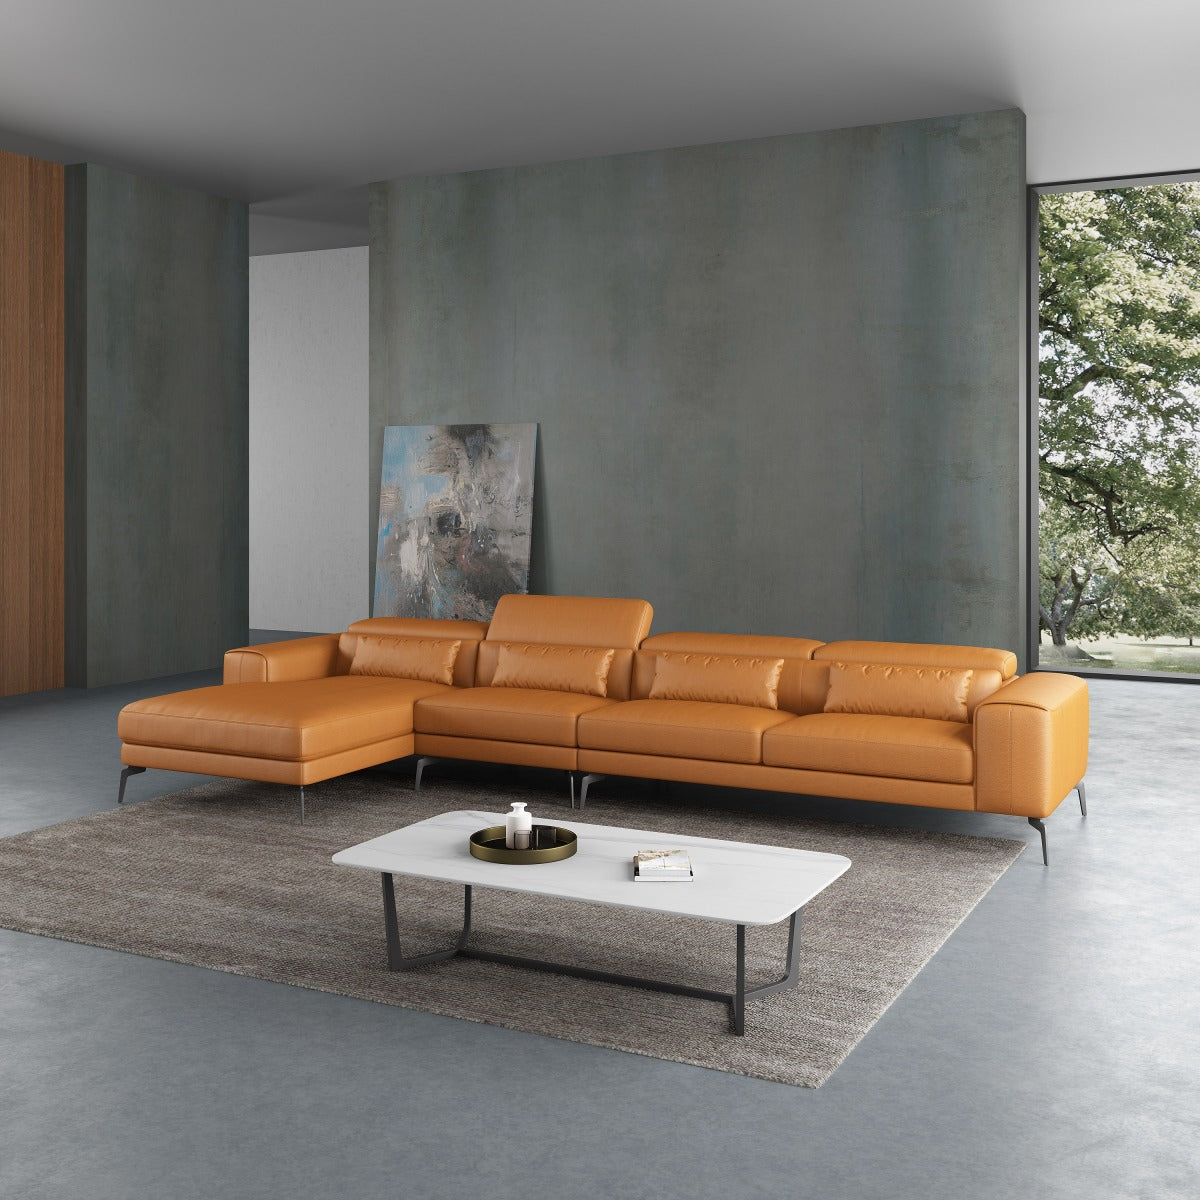 European Furniture - Cavour Mansion Left Hand Facing Sectional In Cognac - 12556L-4LHF - New Star Living